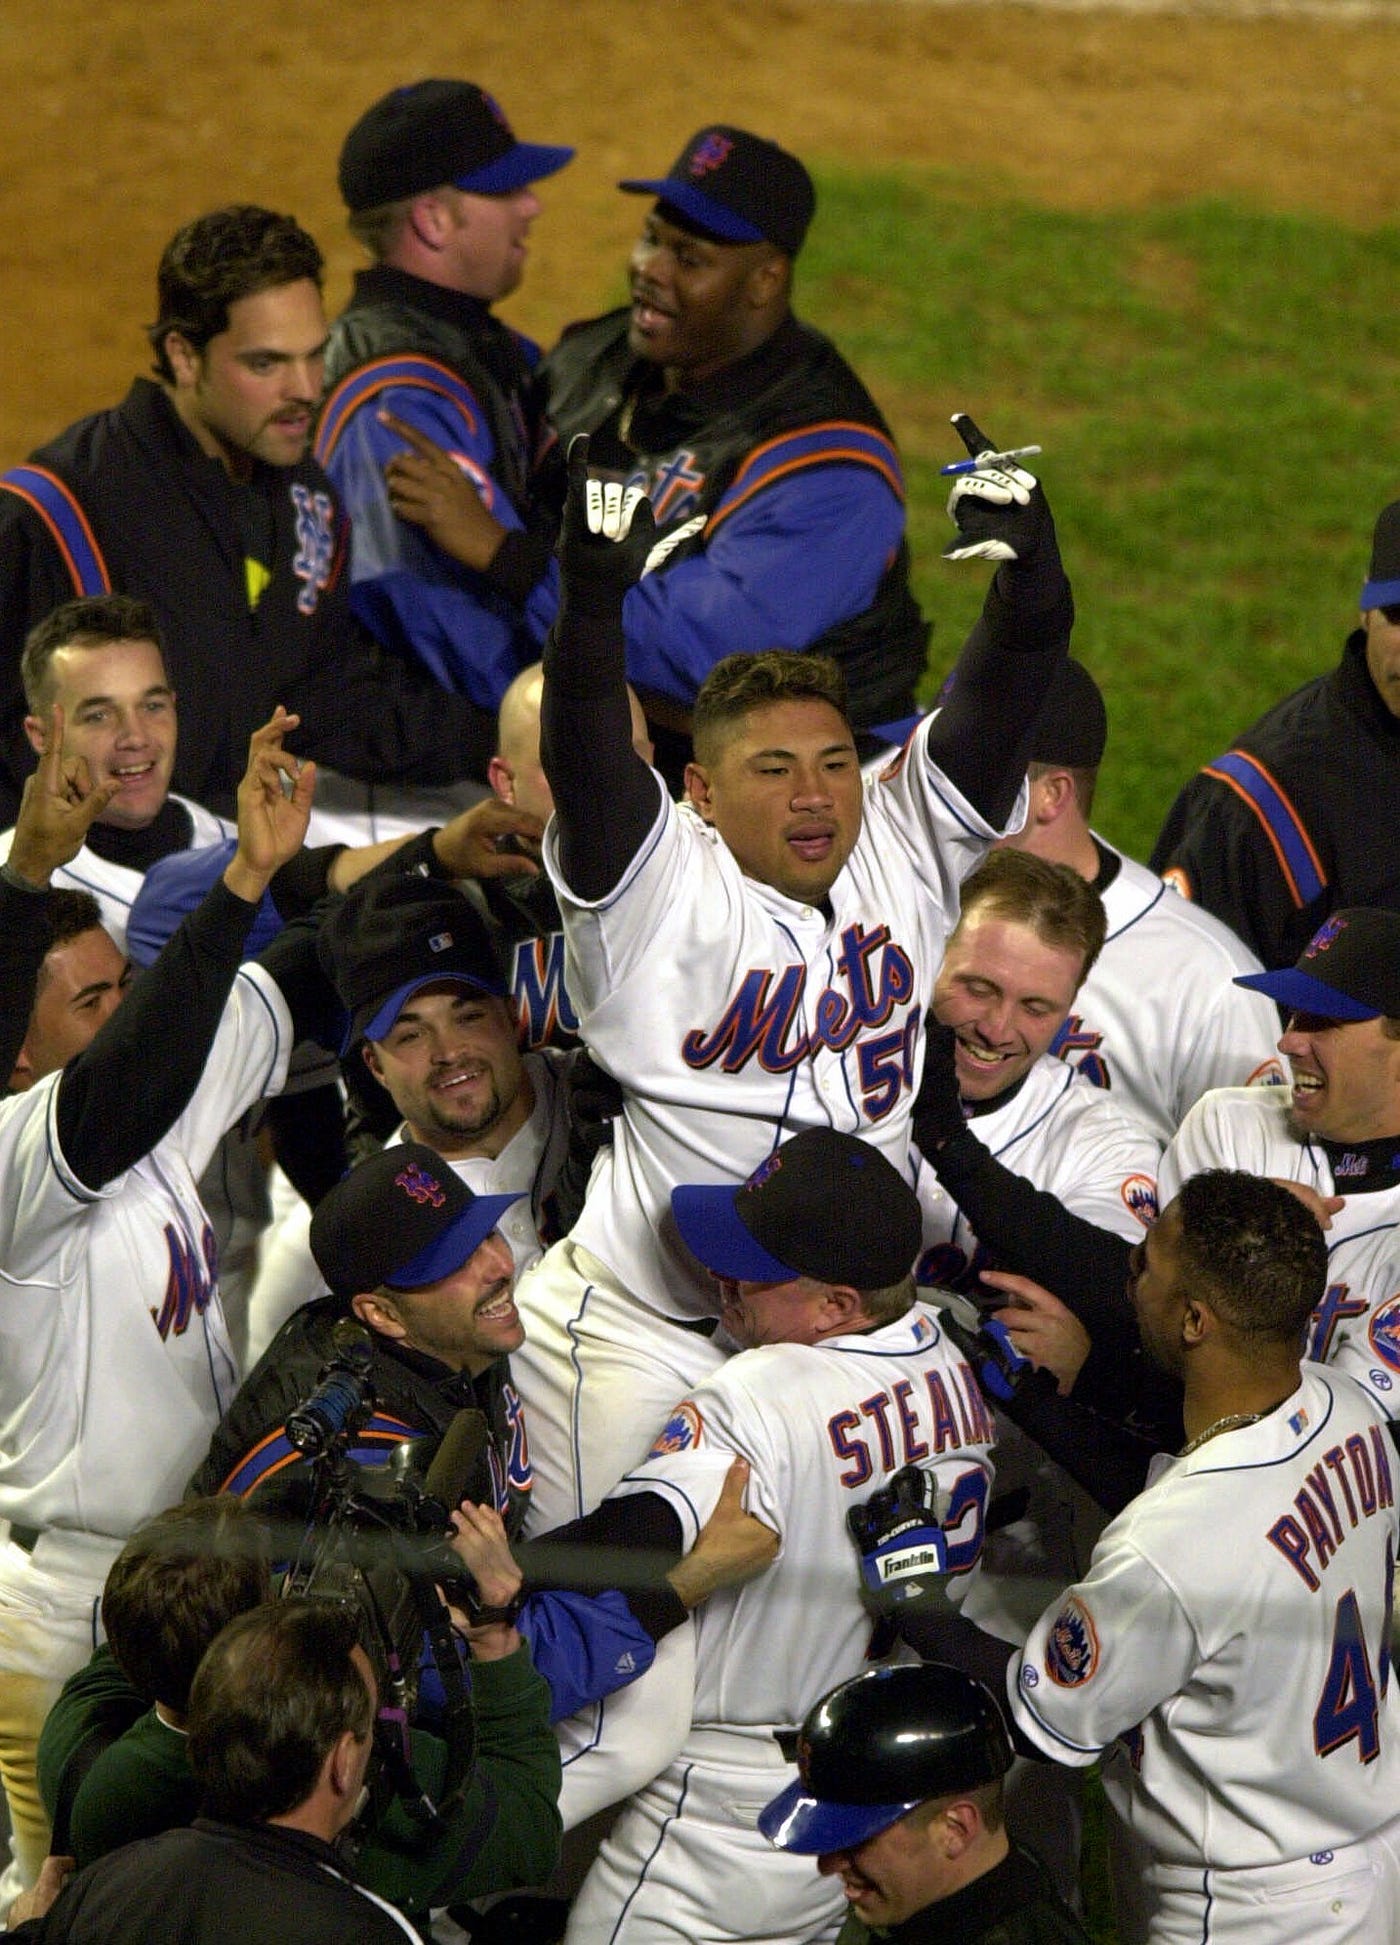 Benny Agbayani's Special Relationship With Mets Fans, by New York Mets